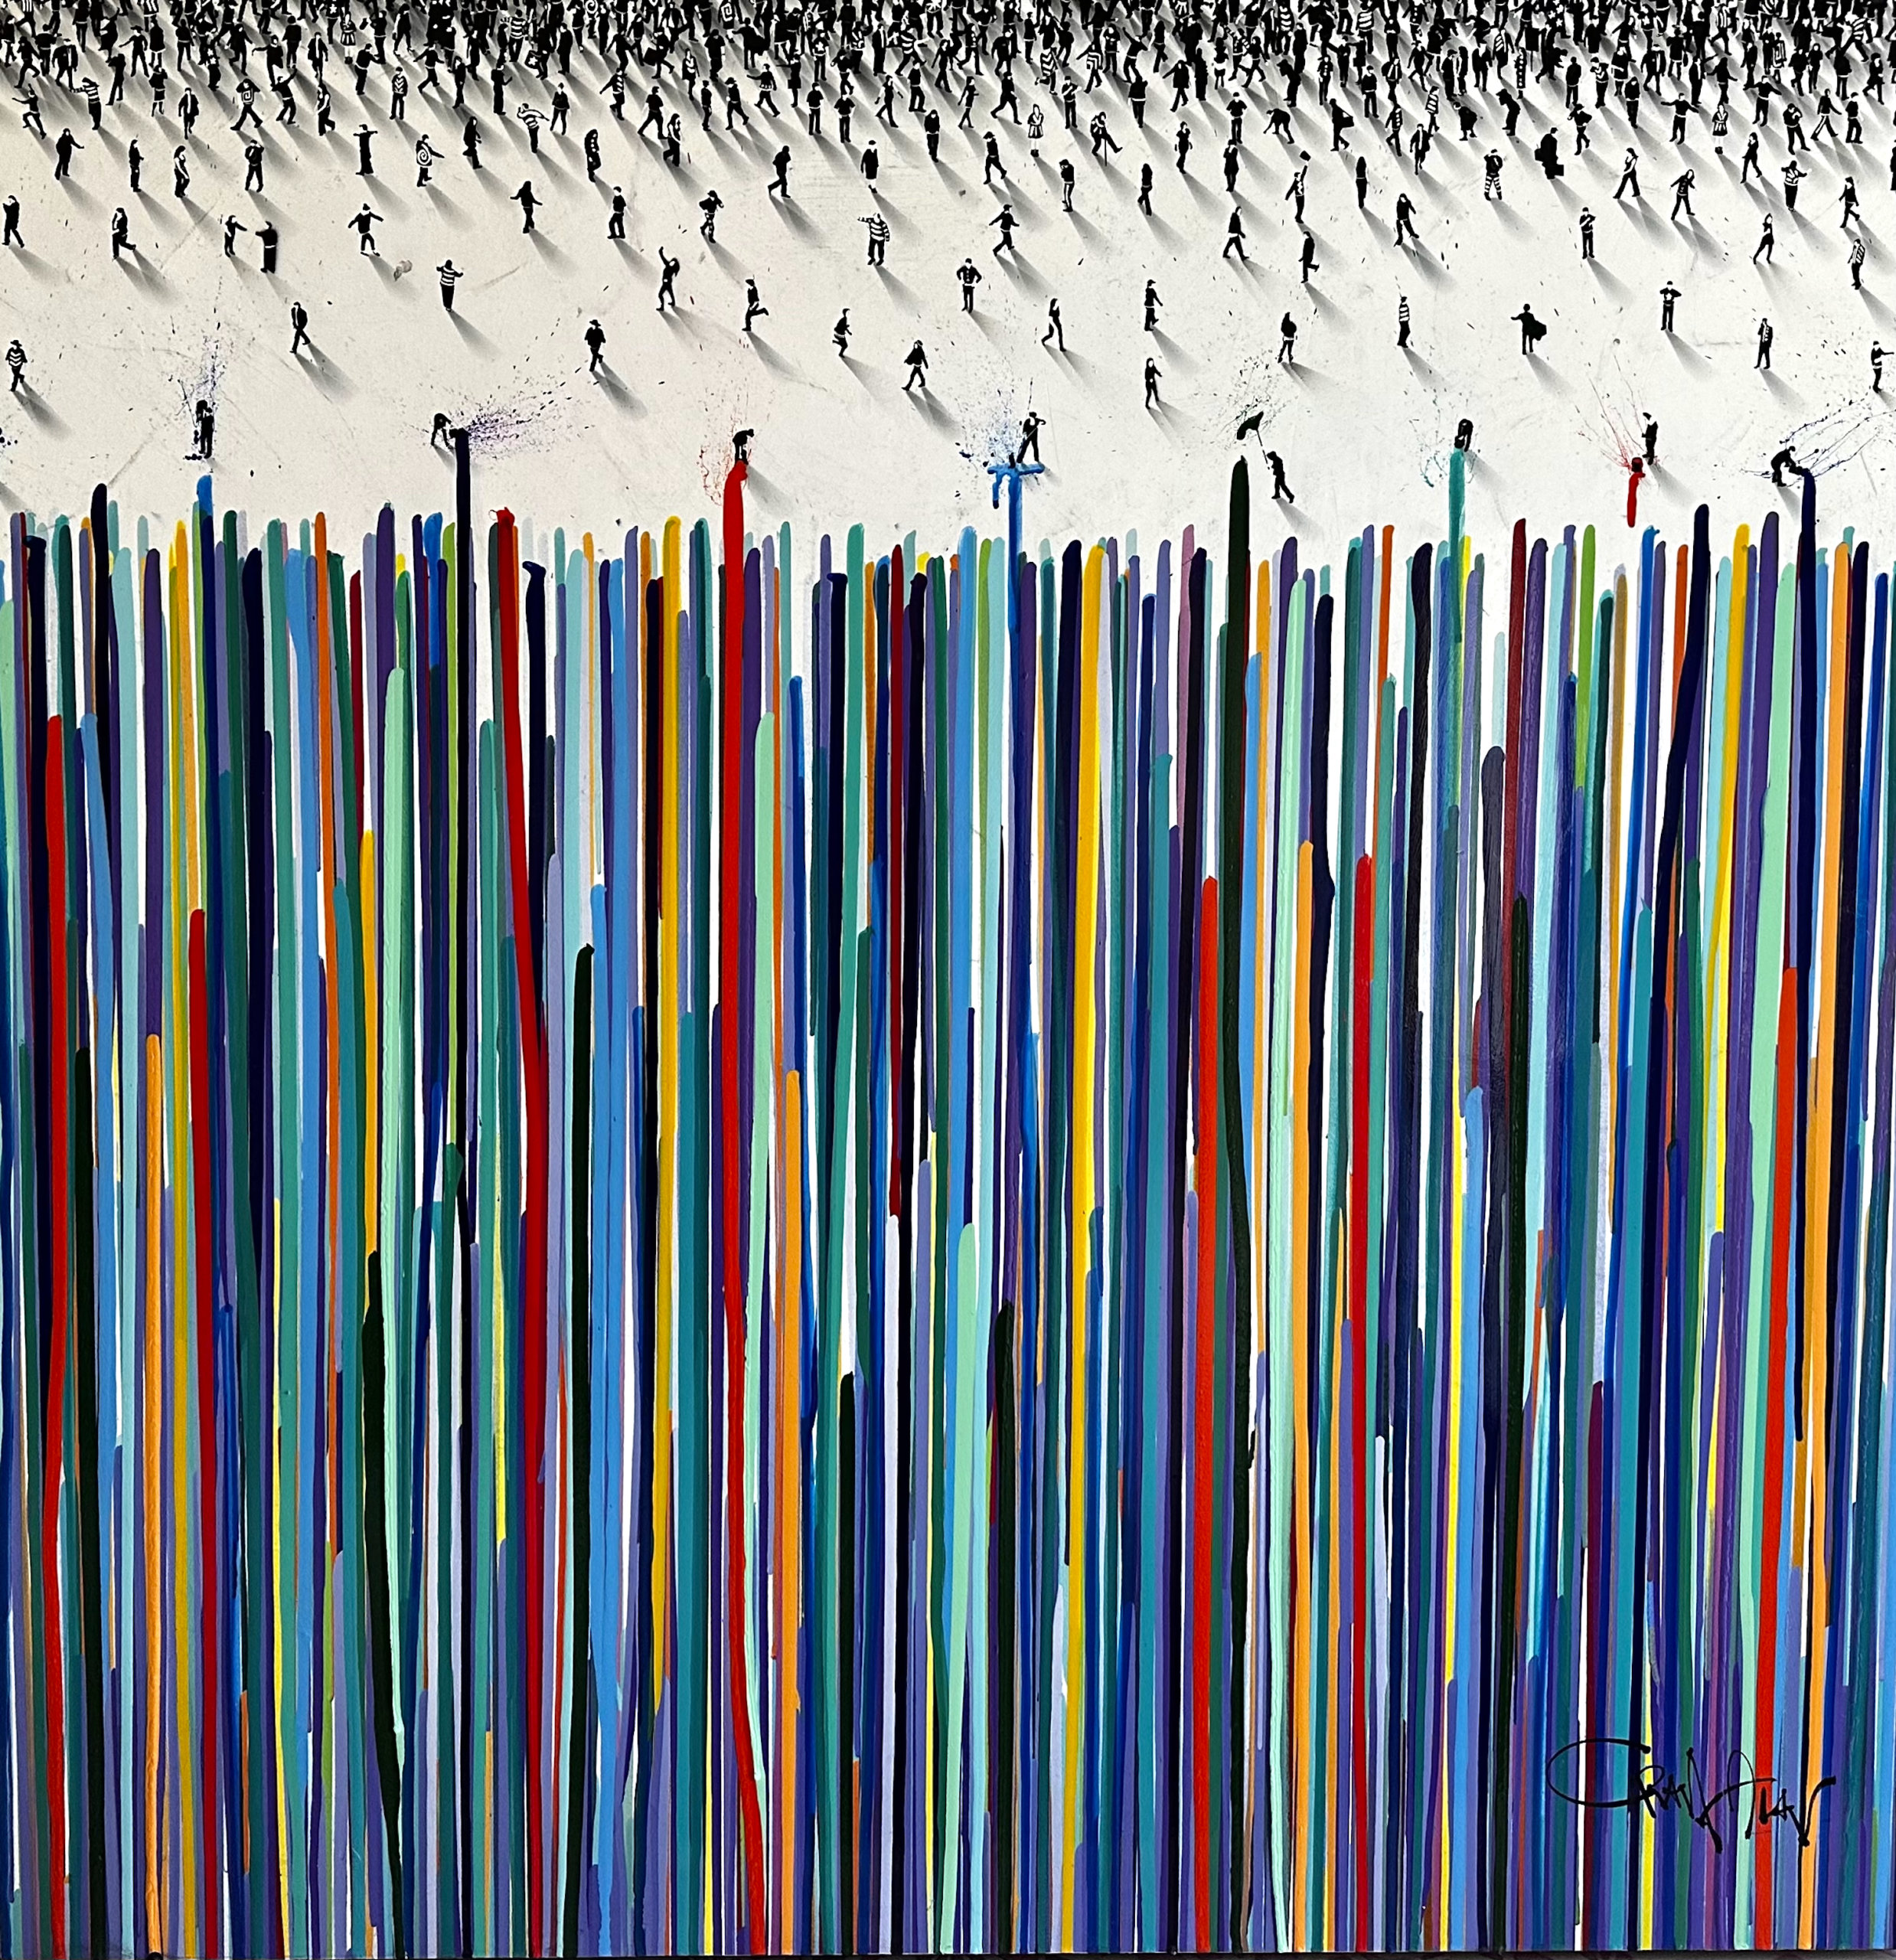 Craig Alan Populus Conceptual piece "Perspectrum" (Mixed Media Original with High Gloss, 40" x 40") at The White Room Gallery